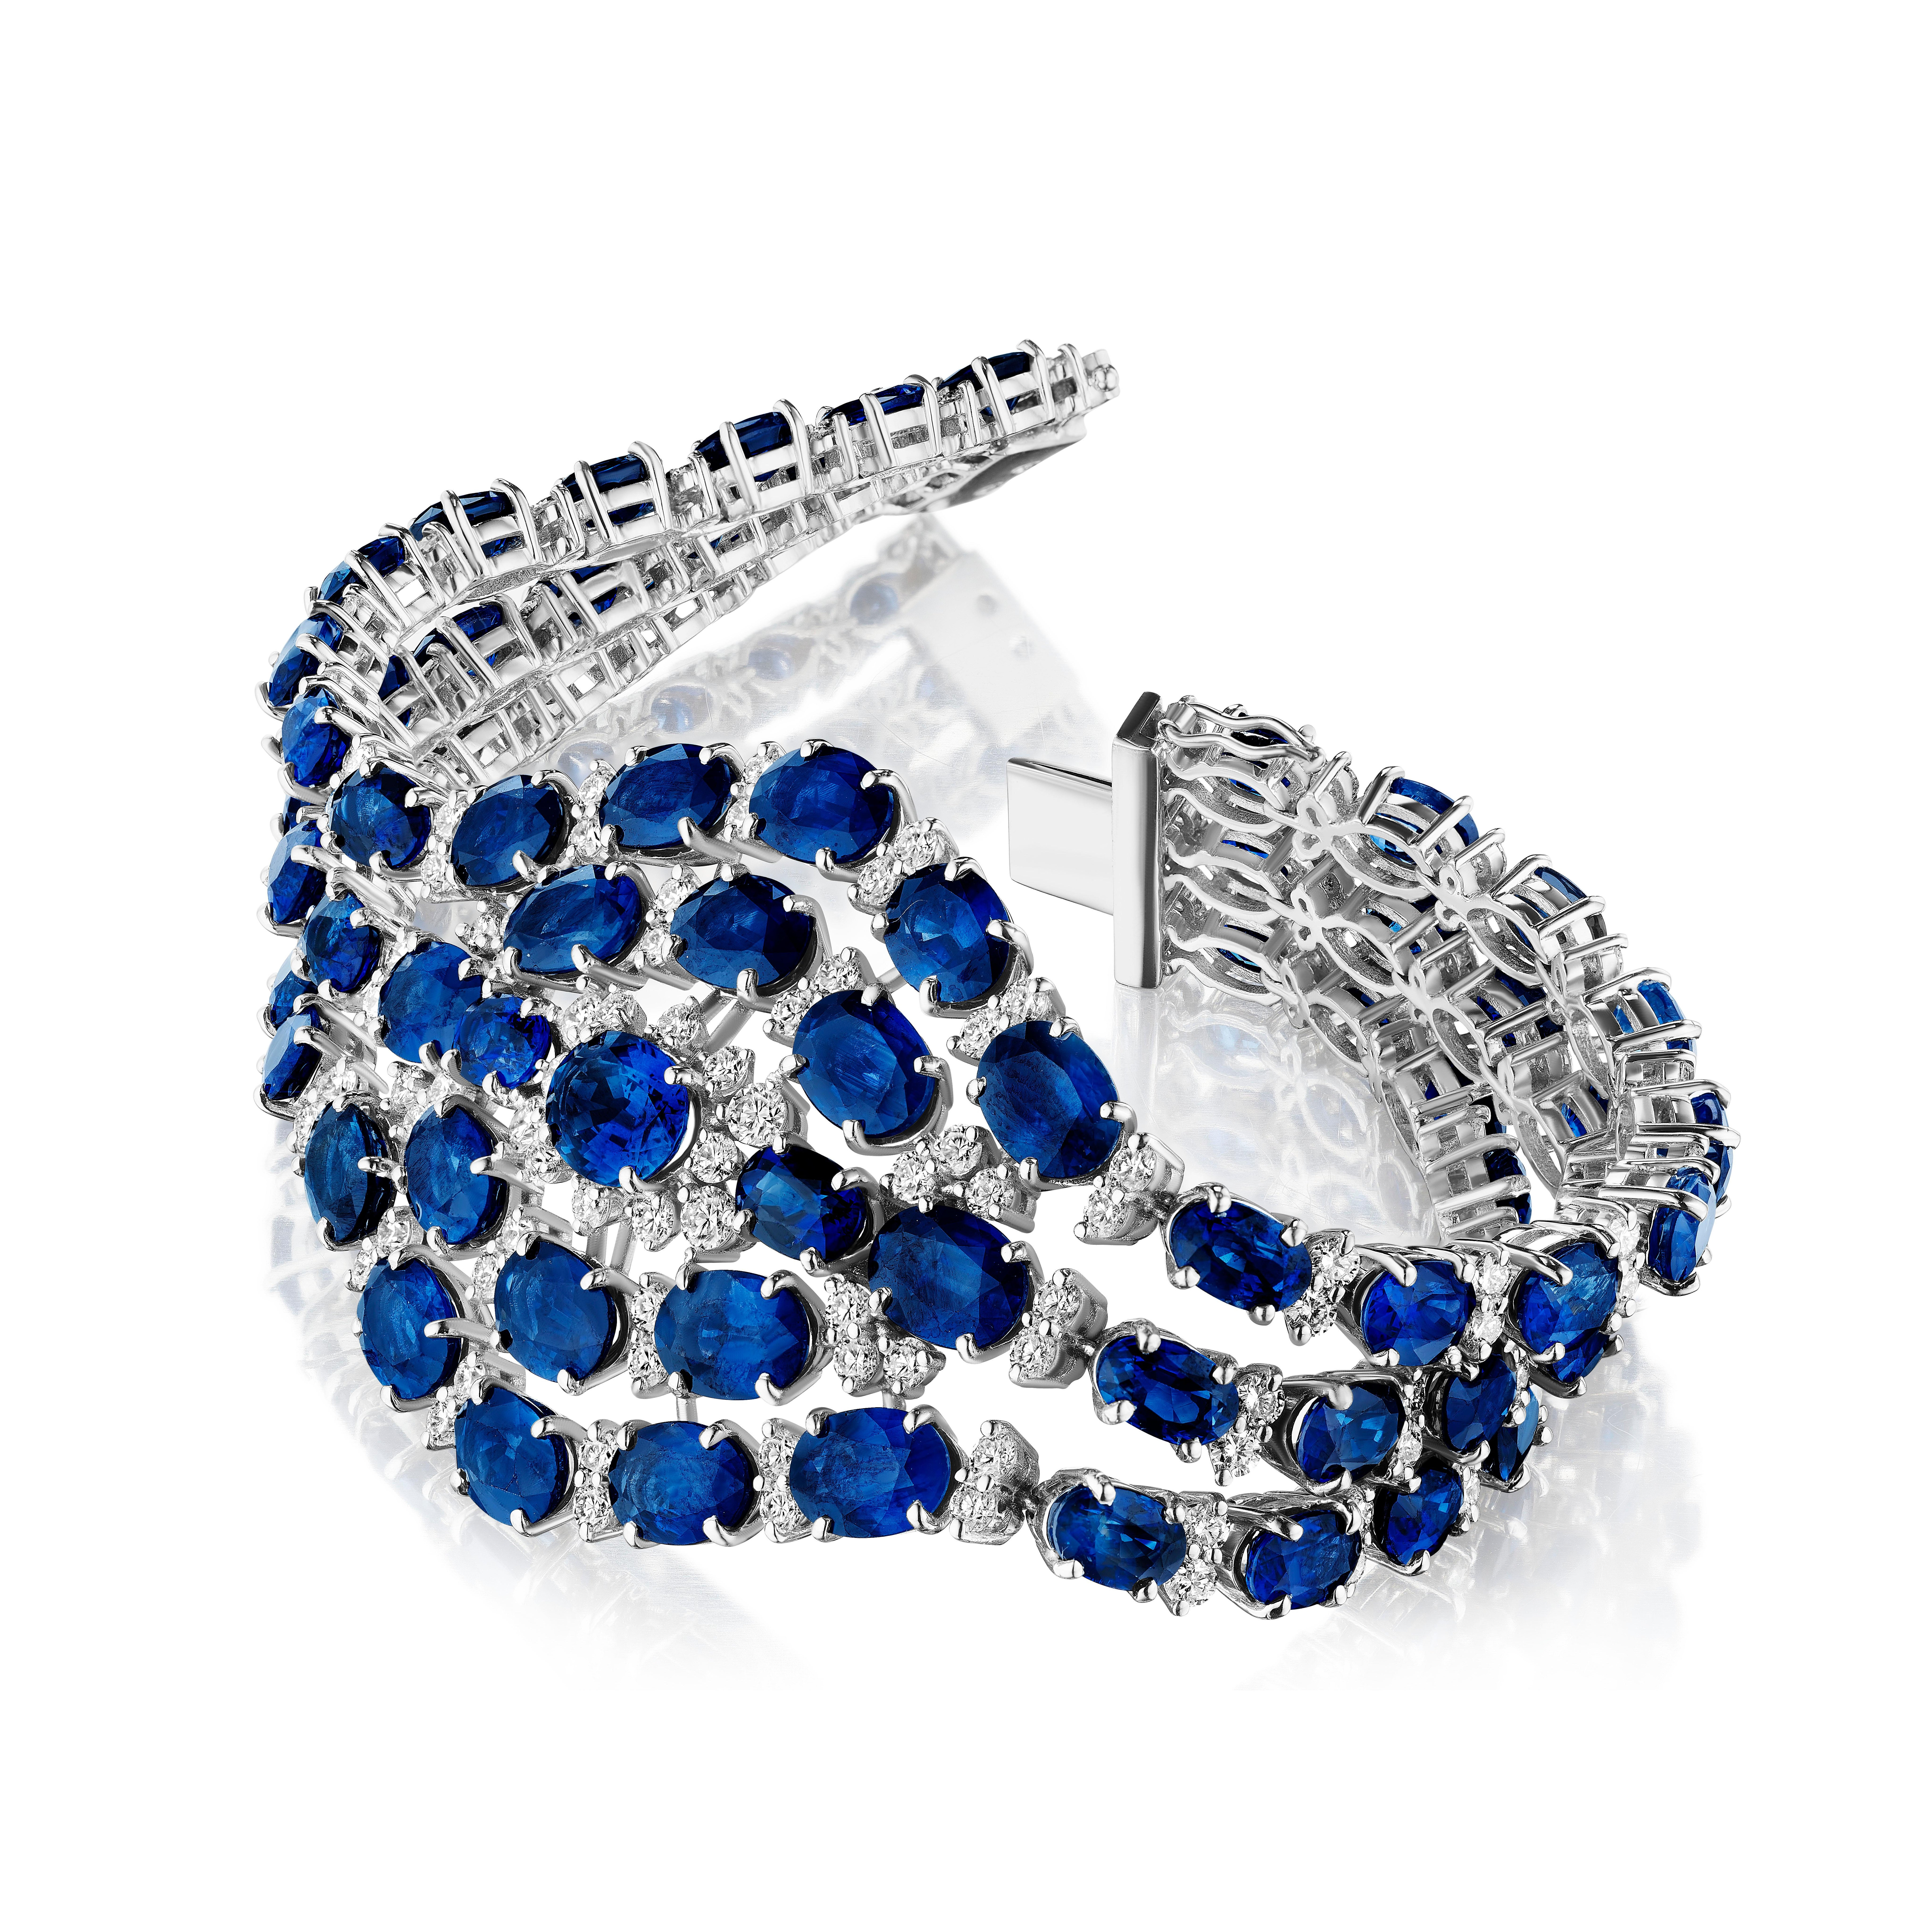 •	18KT White Gold
•	7” Long
•	16.86 Carats

•	Number of Oval Sapphires: 75
•	Carat Weight: 56.11ctw

•	Number of Round Diamonds: 168
•	Carat Weight: 5.75ctw
